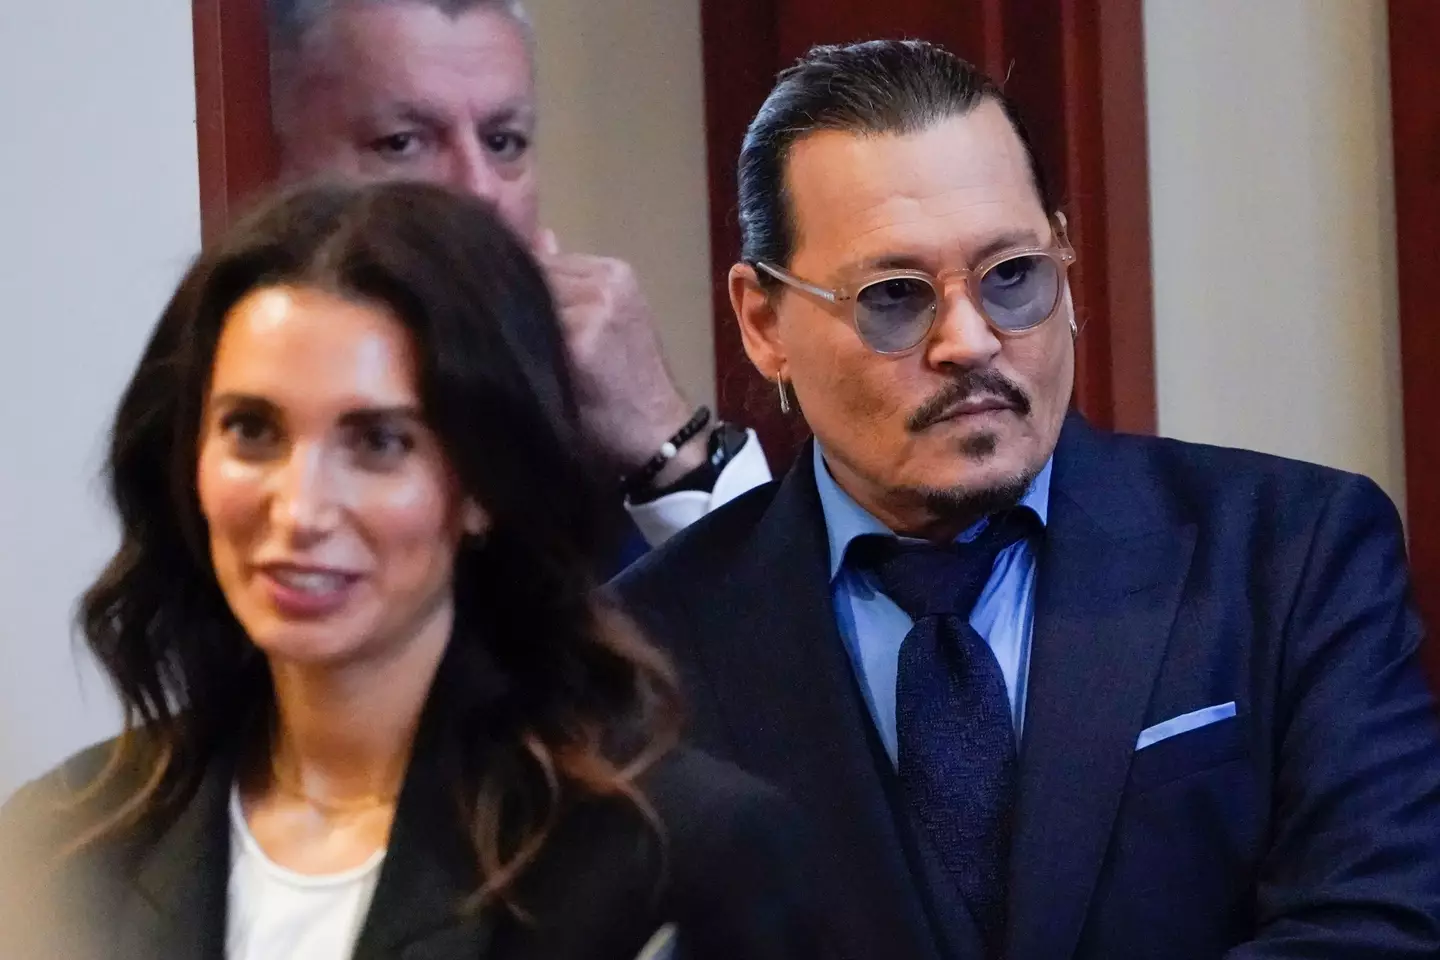 The appearance comes as both Depp and Heard's attorneys rested their cases and offered closing arguments last week.